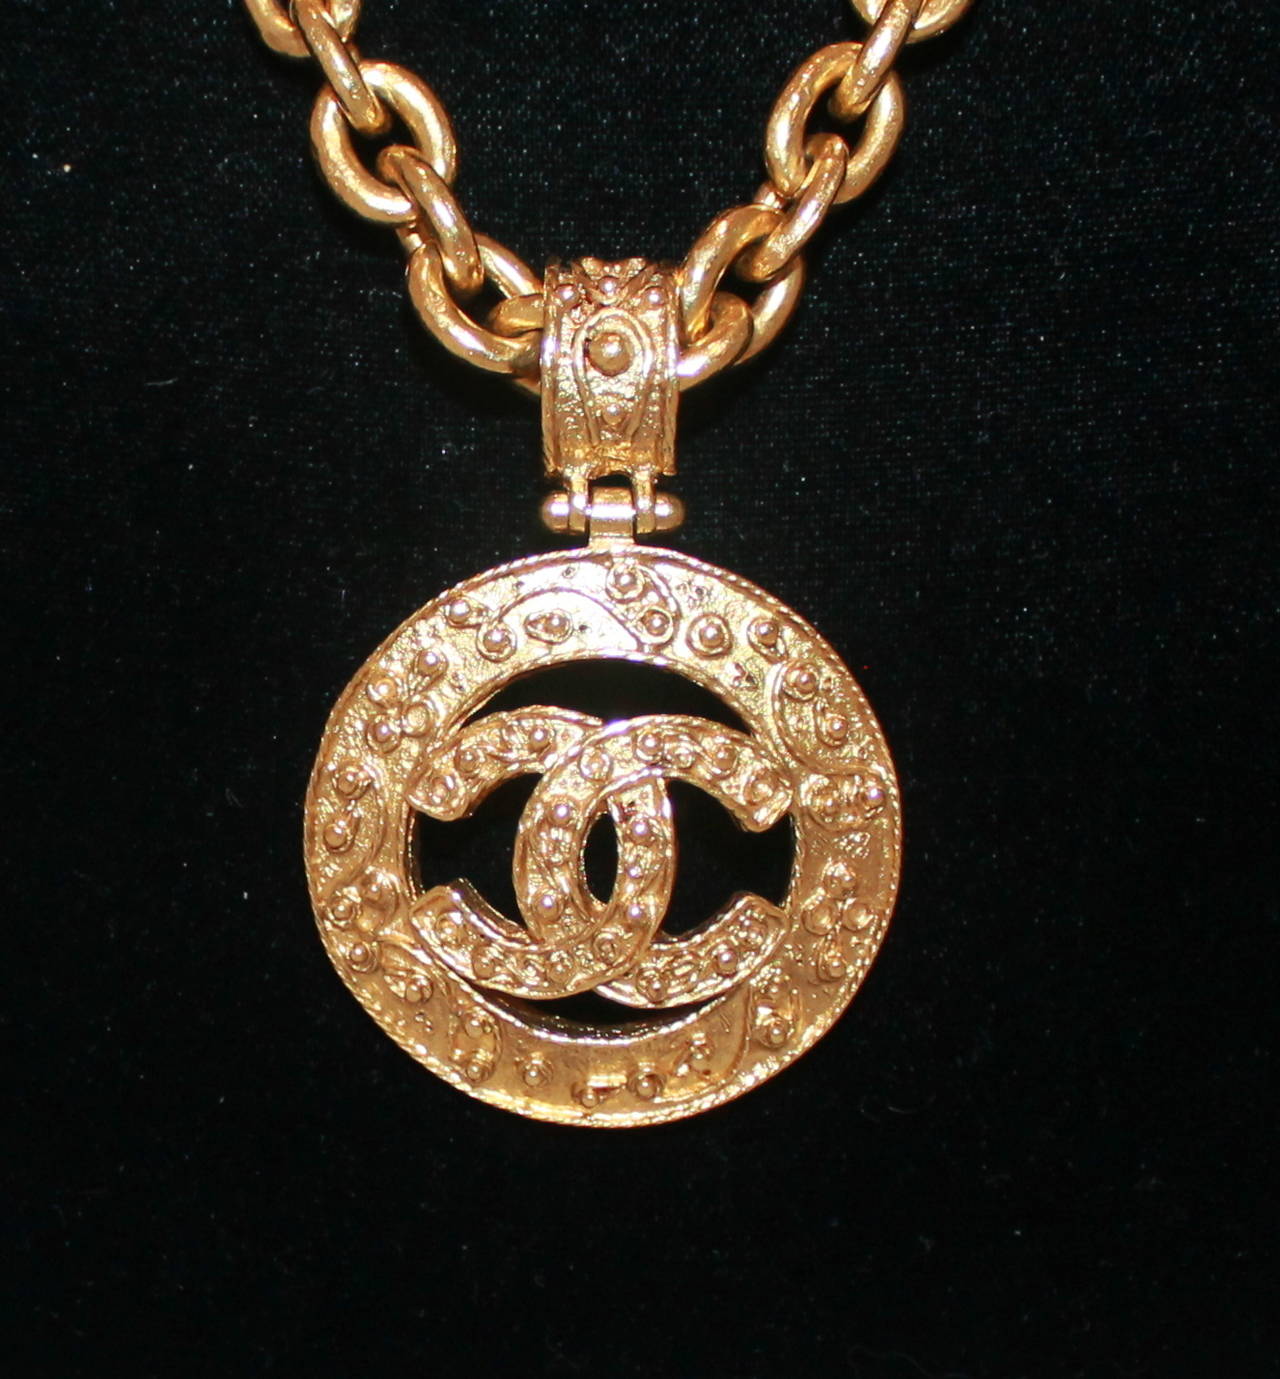 Chanel Vintage Gold Medallion Necklace - circa 1994. It is in excellent vintage condition.

Length- 26.5